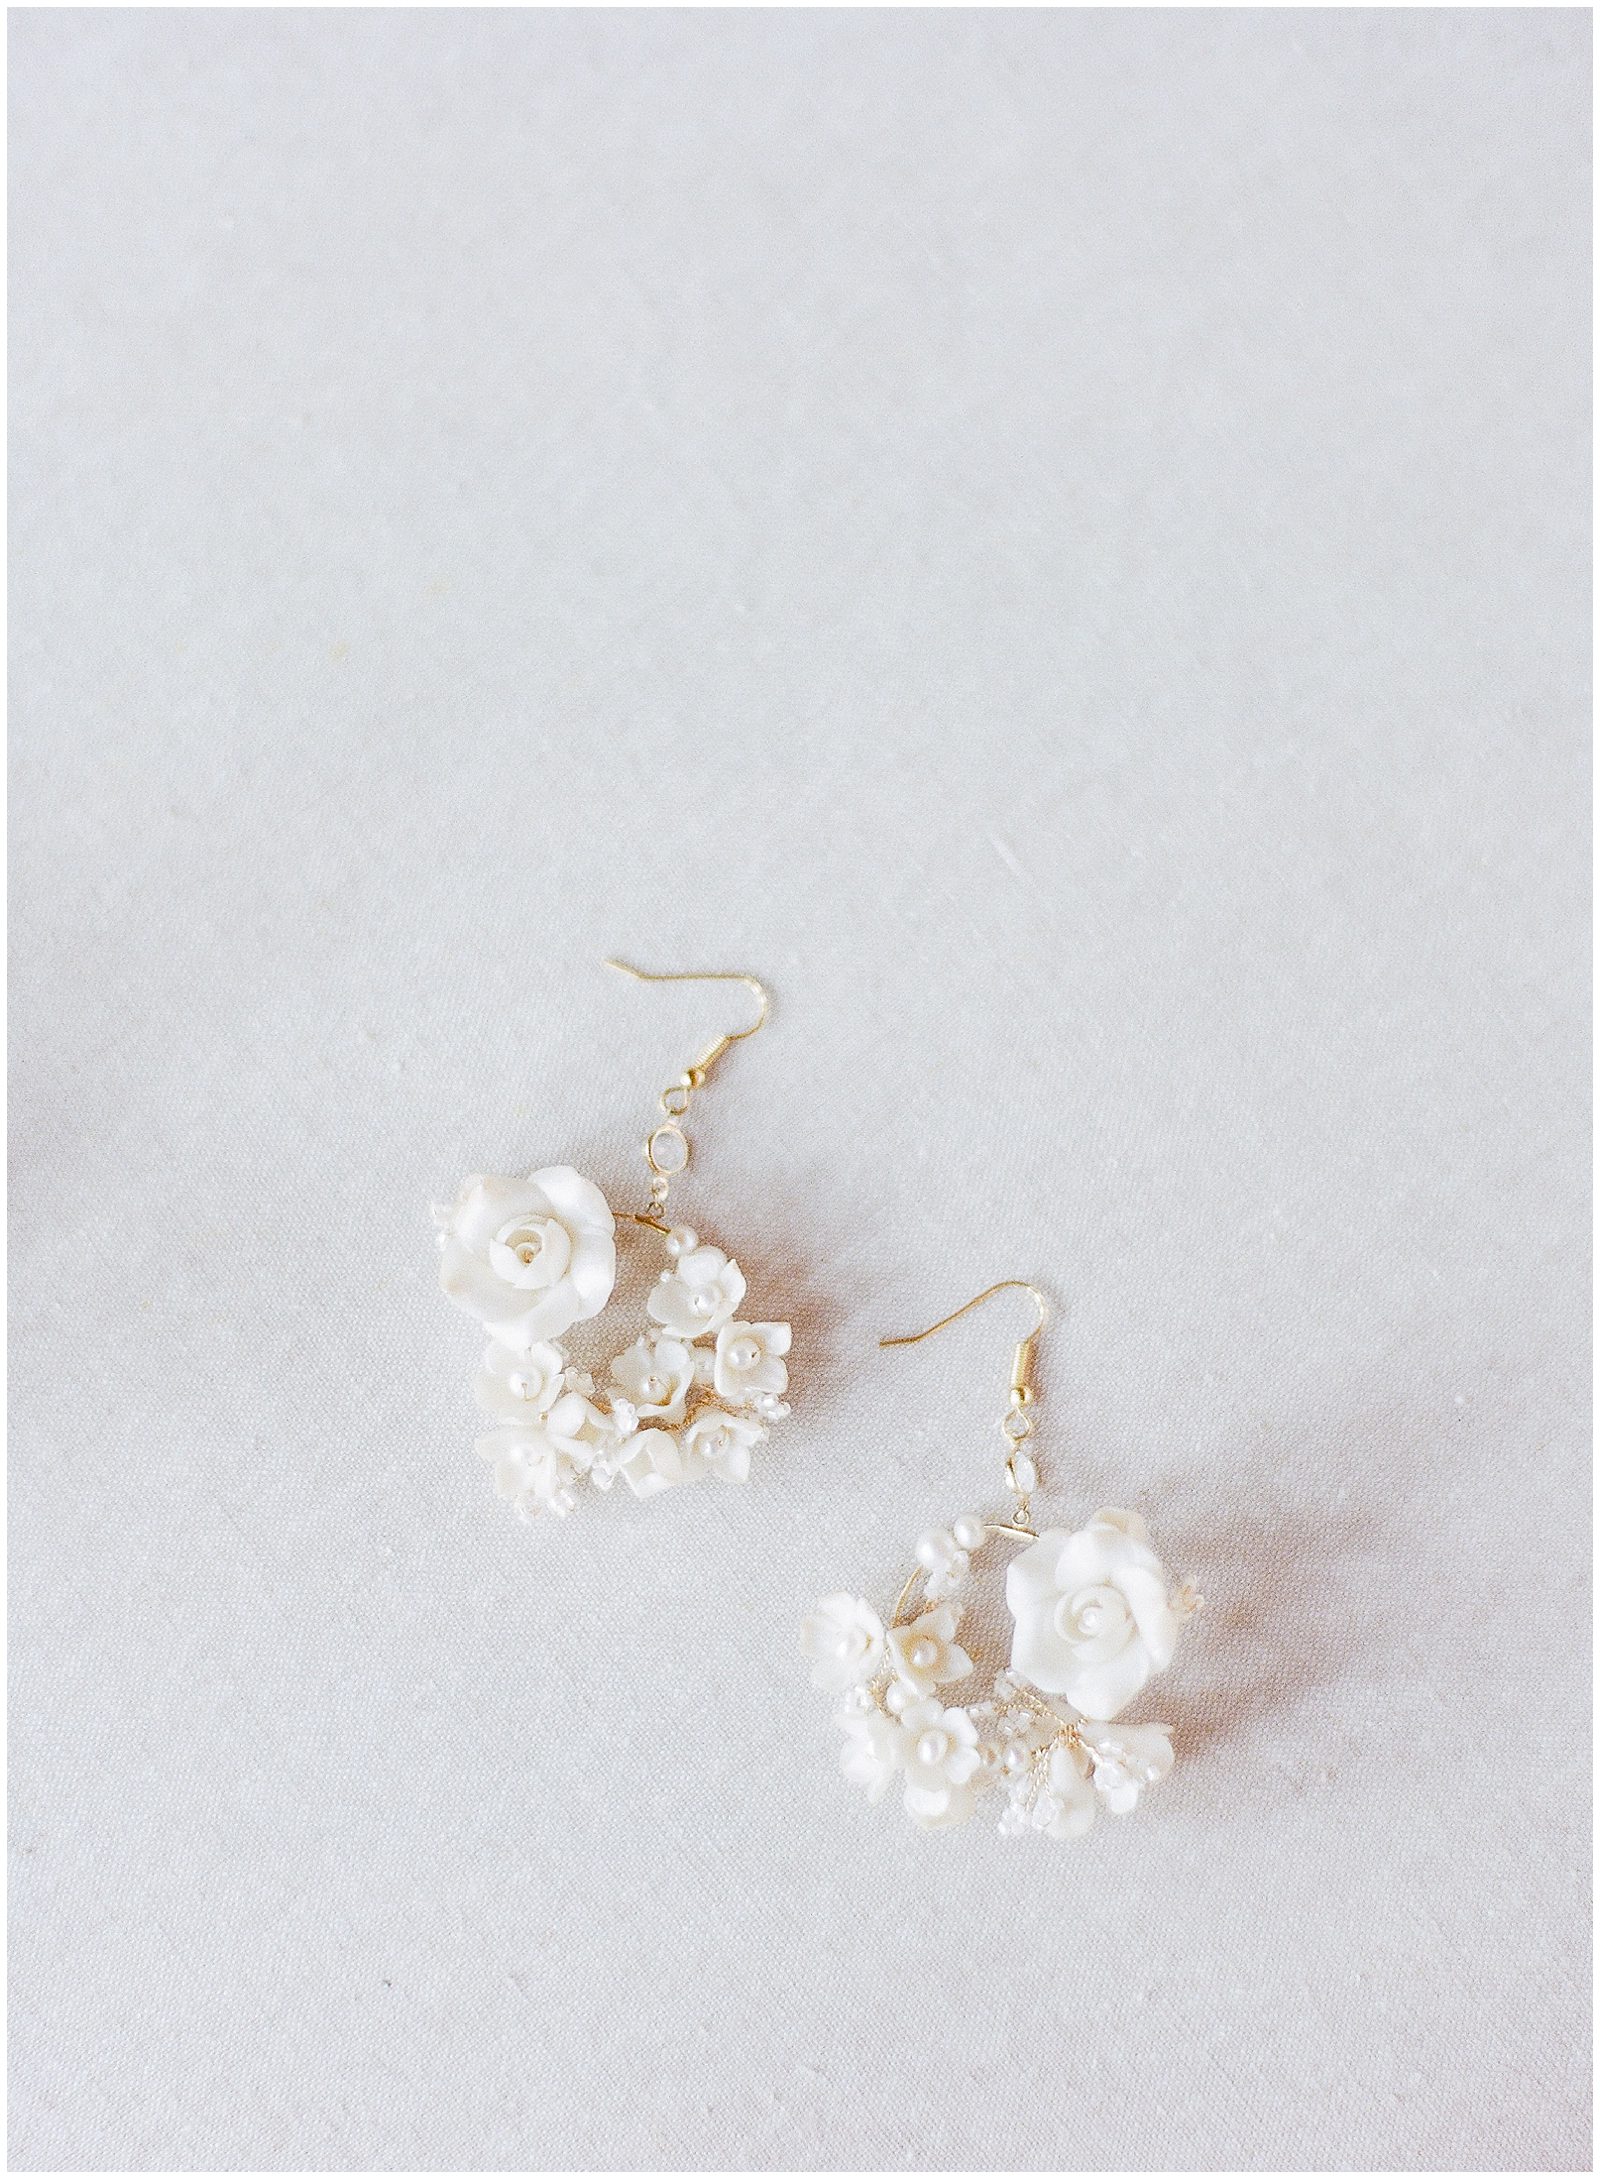 Providence Cotton Mill Wedding Brides Earrings Photo